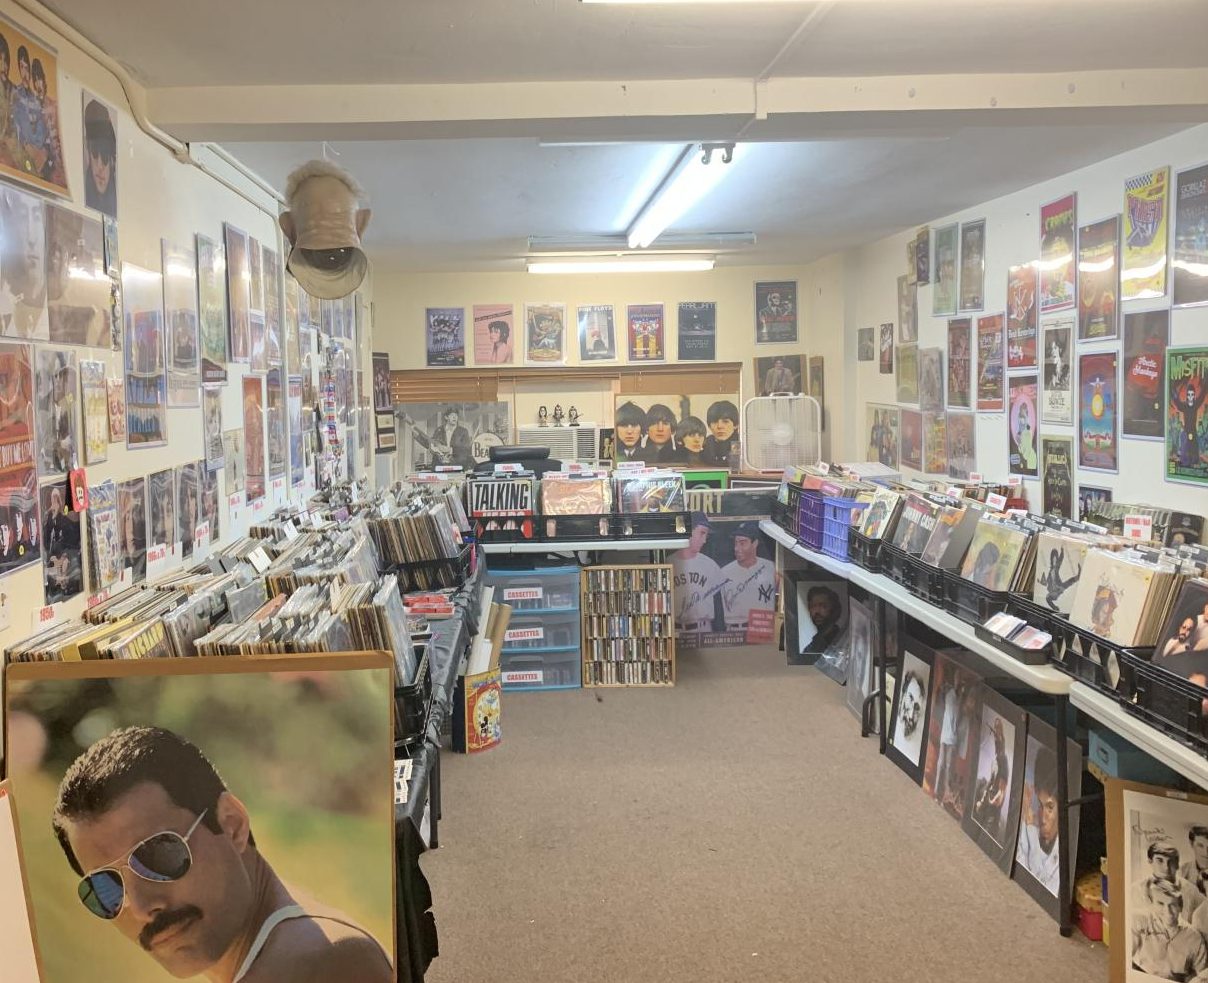 Gables+Records+N+Comics%3A+A+Blast+to+the+Past